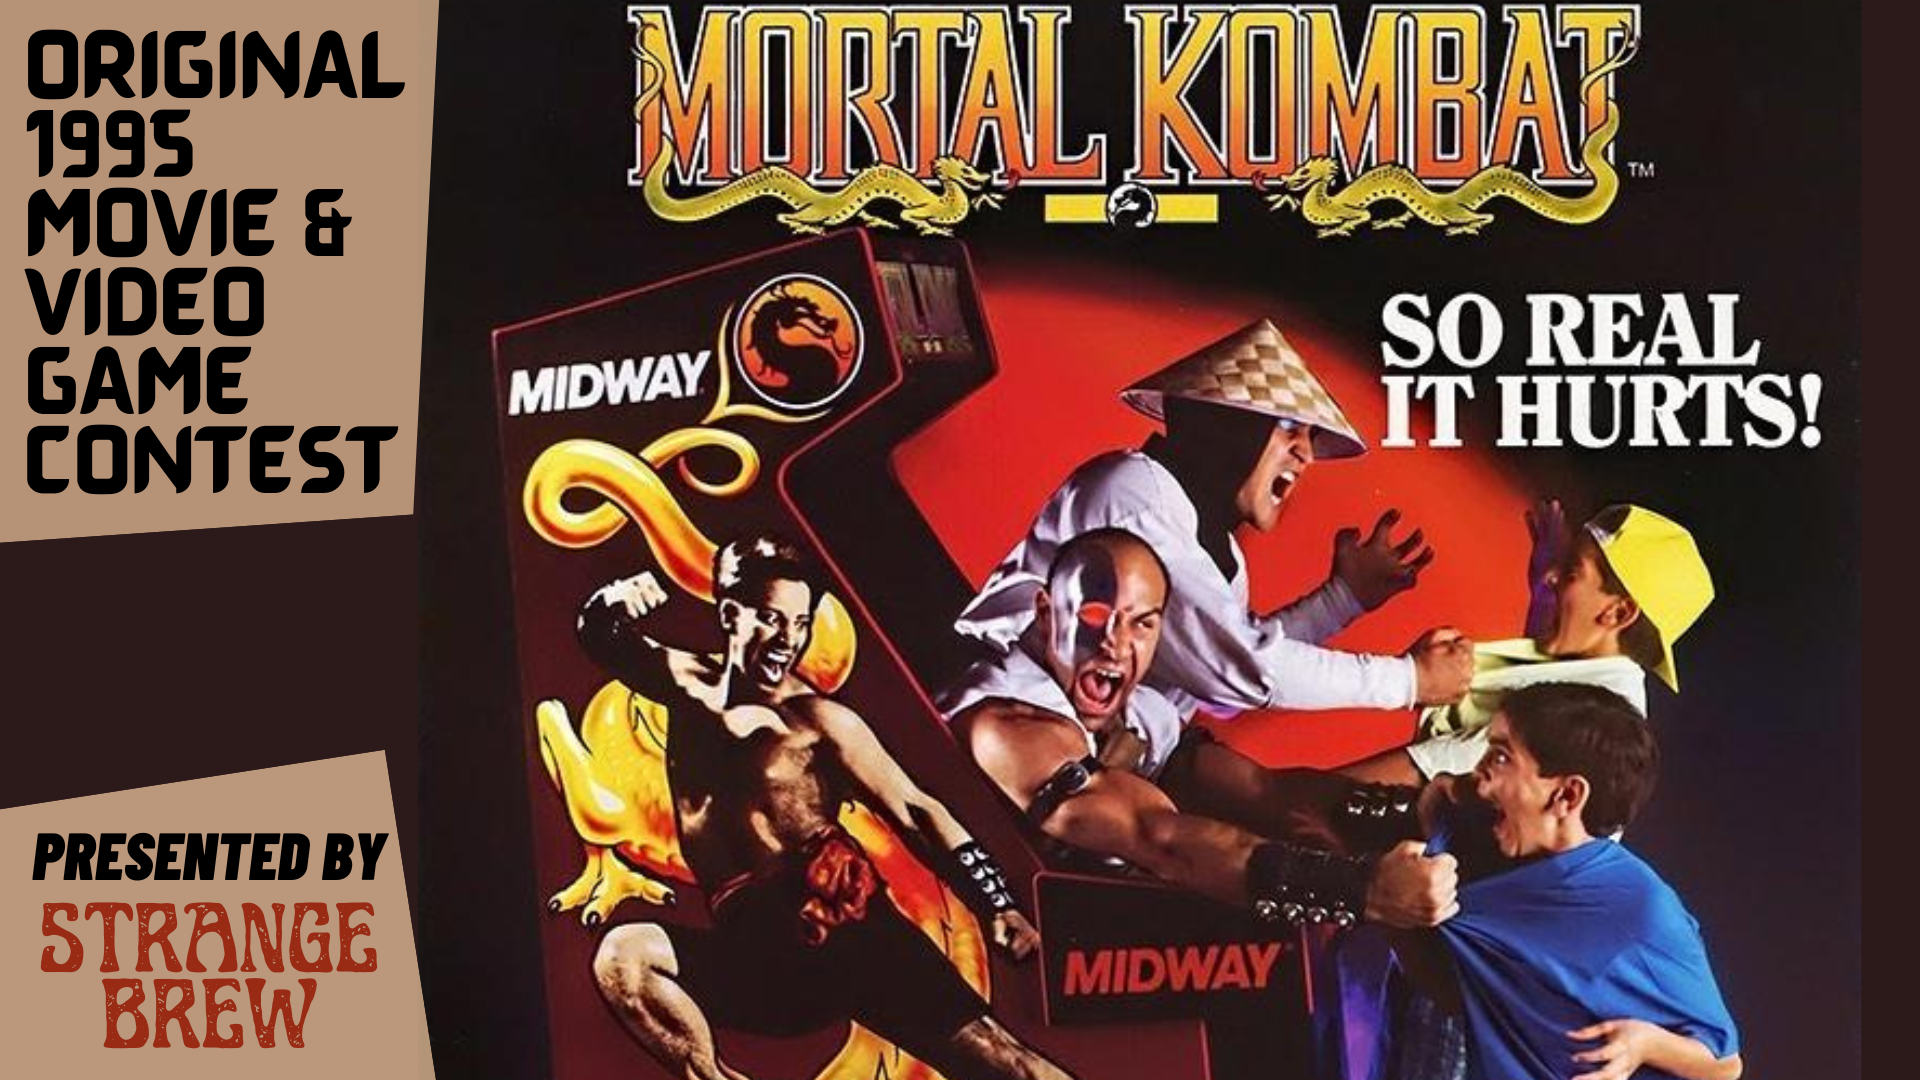 Stream episode Mortal Kombat(1995) - Movie Review! #199 by